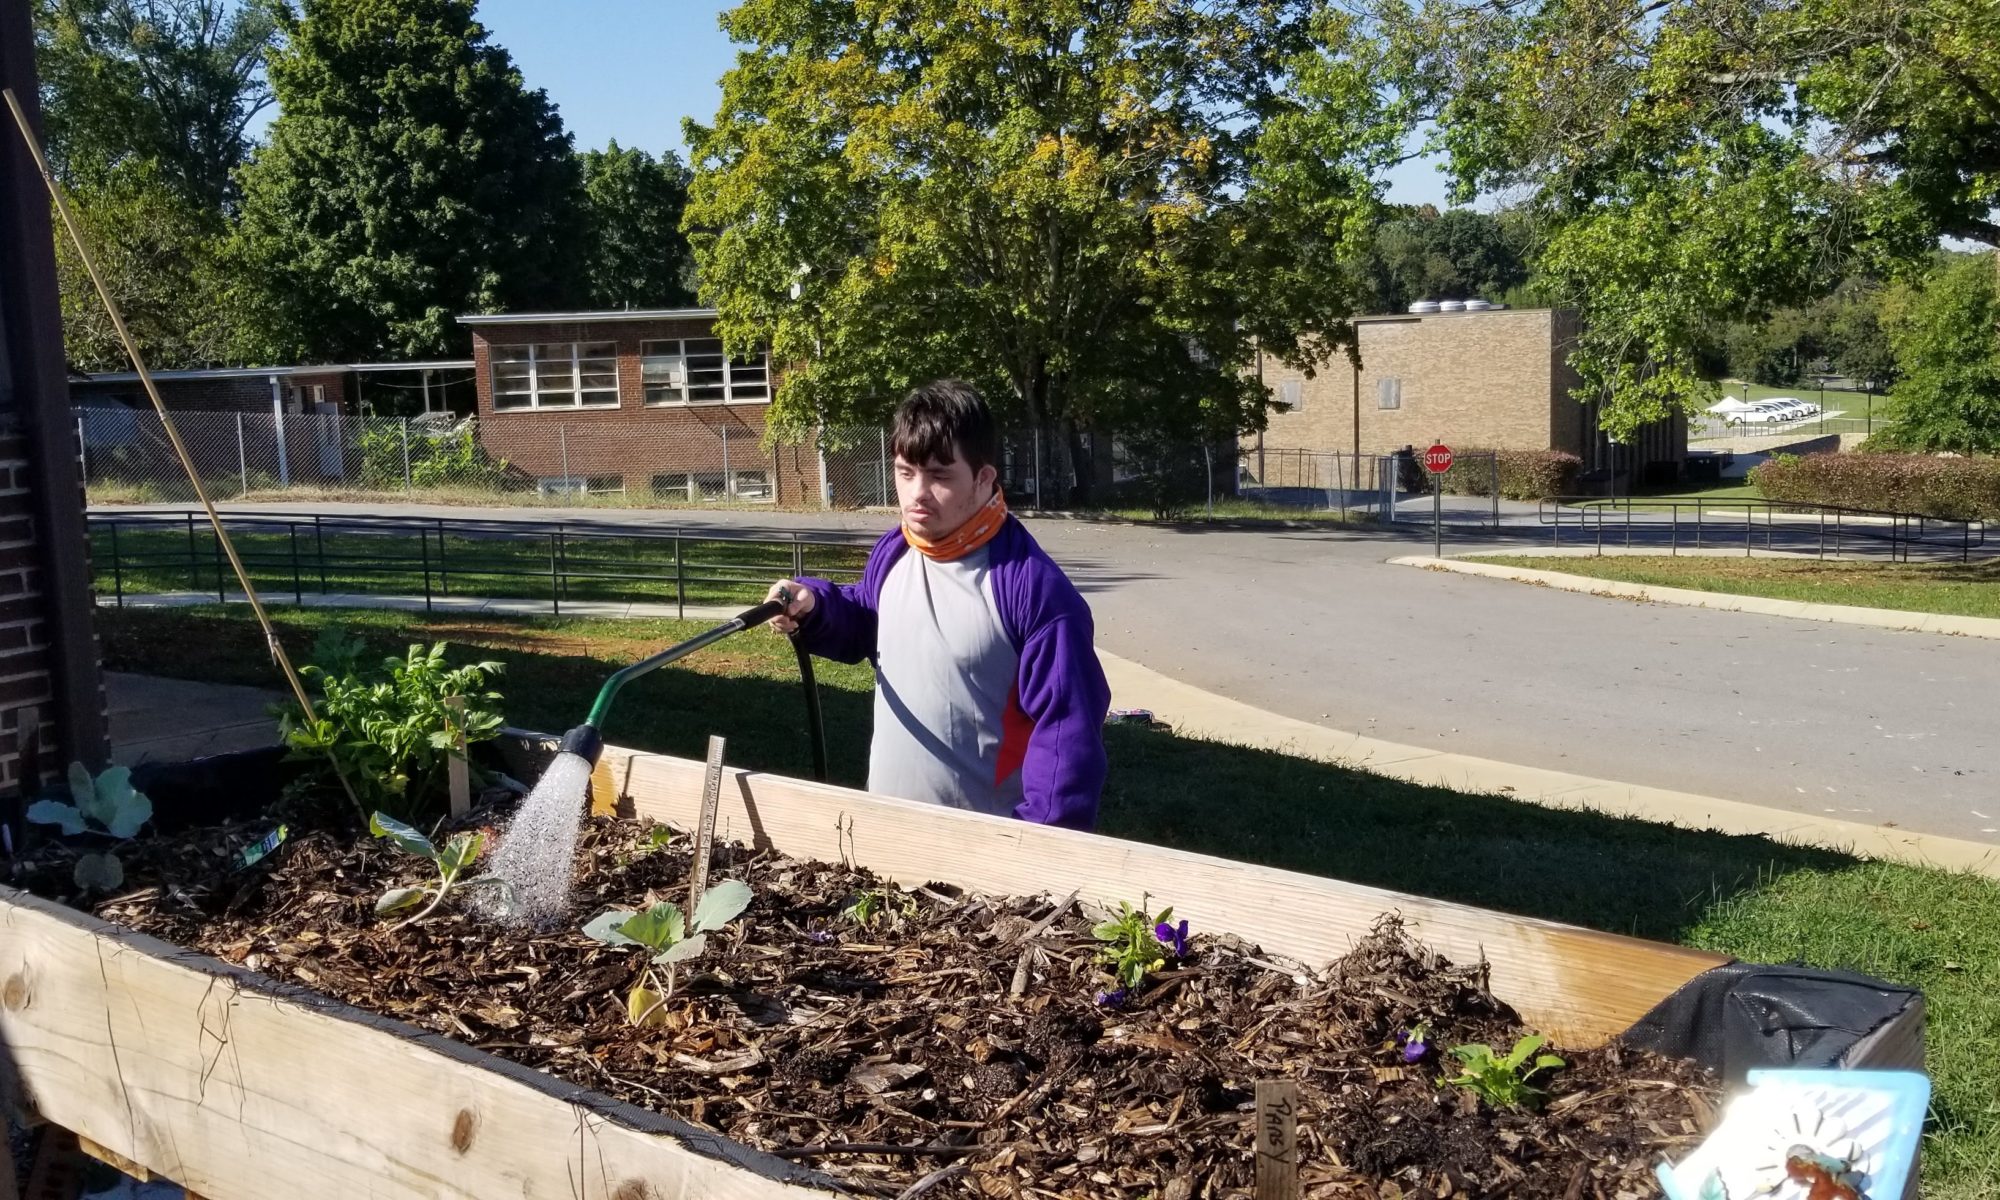 A Tennessee School for the Deaf student waters plants in a raised bed